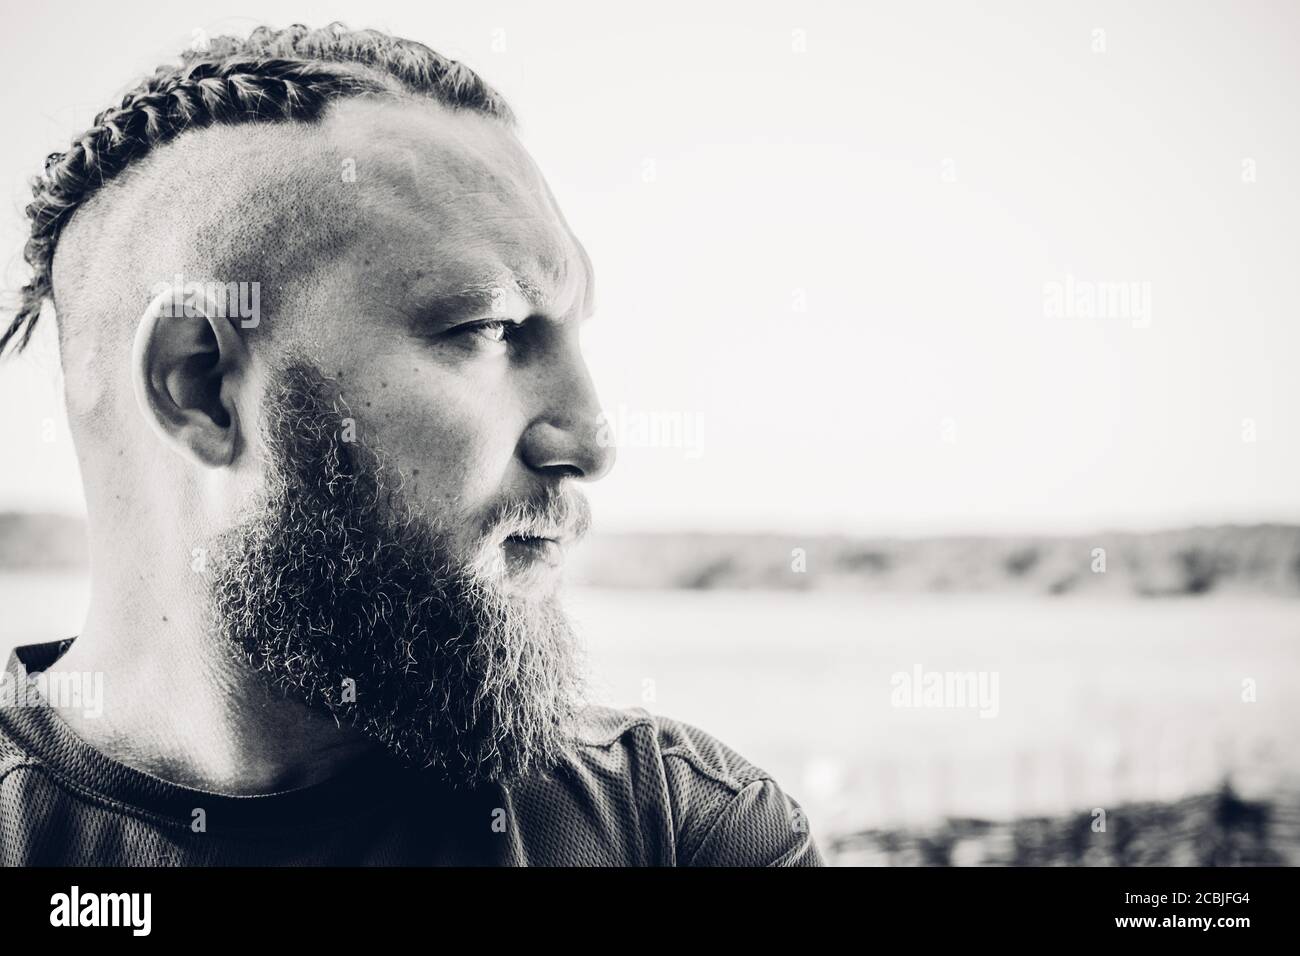 Handsome long-bearded man. Man with a beard profile. Freedom, space, air, biker, lifestyle Stock Photo